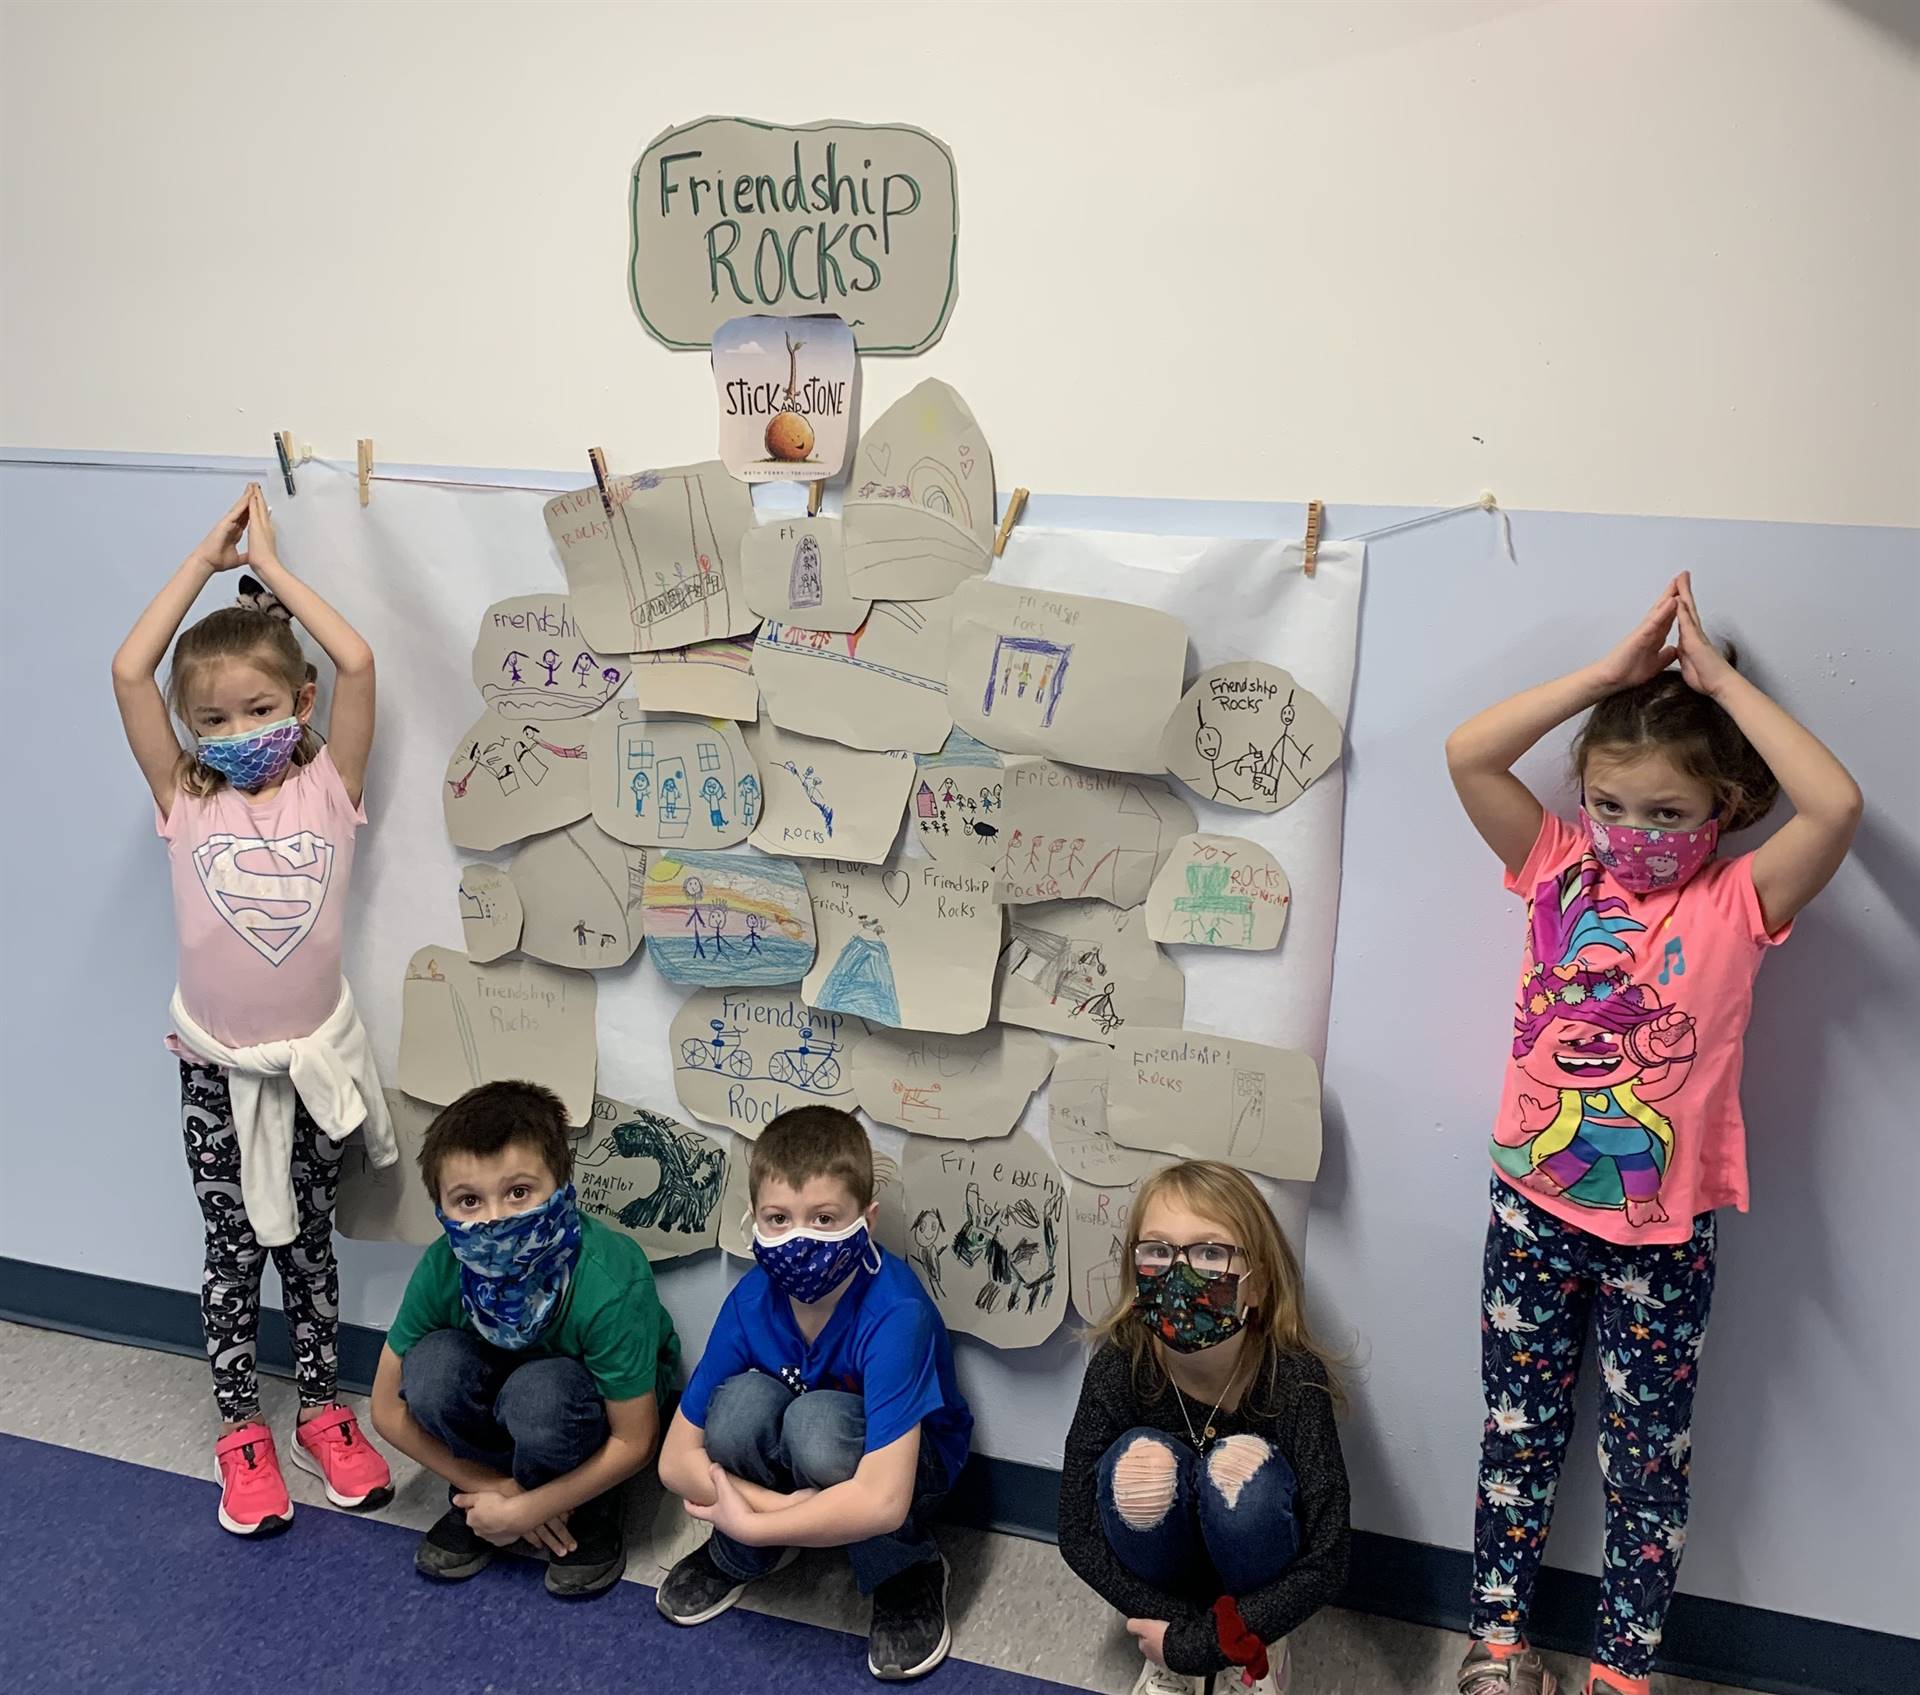 STUDENTS in front of wall covered in paper gray rocks and sign saying "Friendship Rocks"